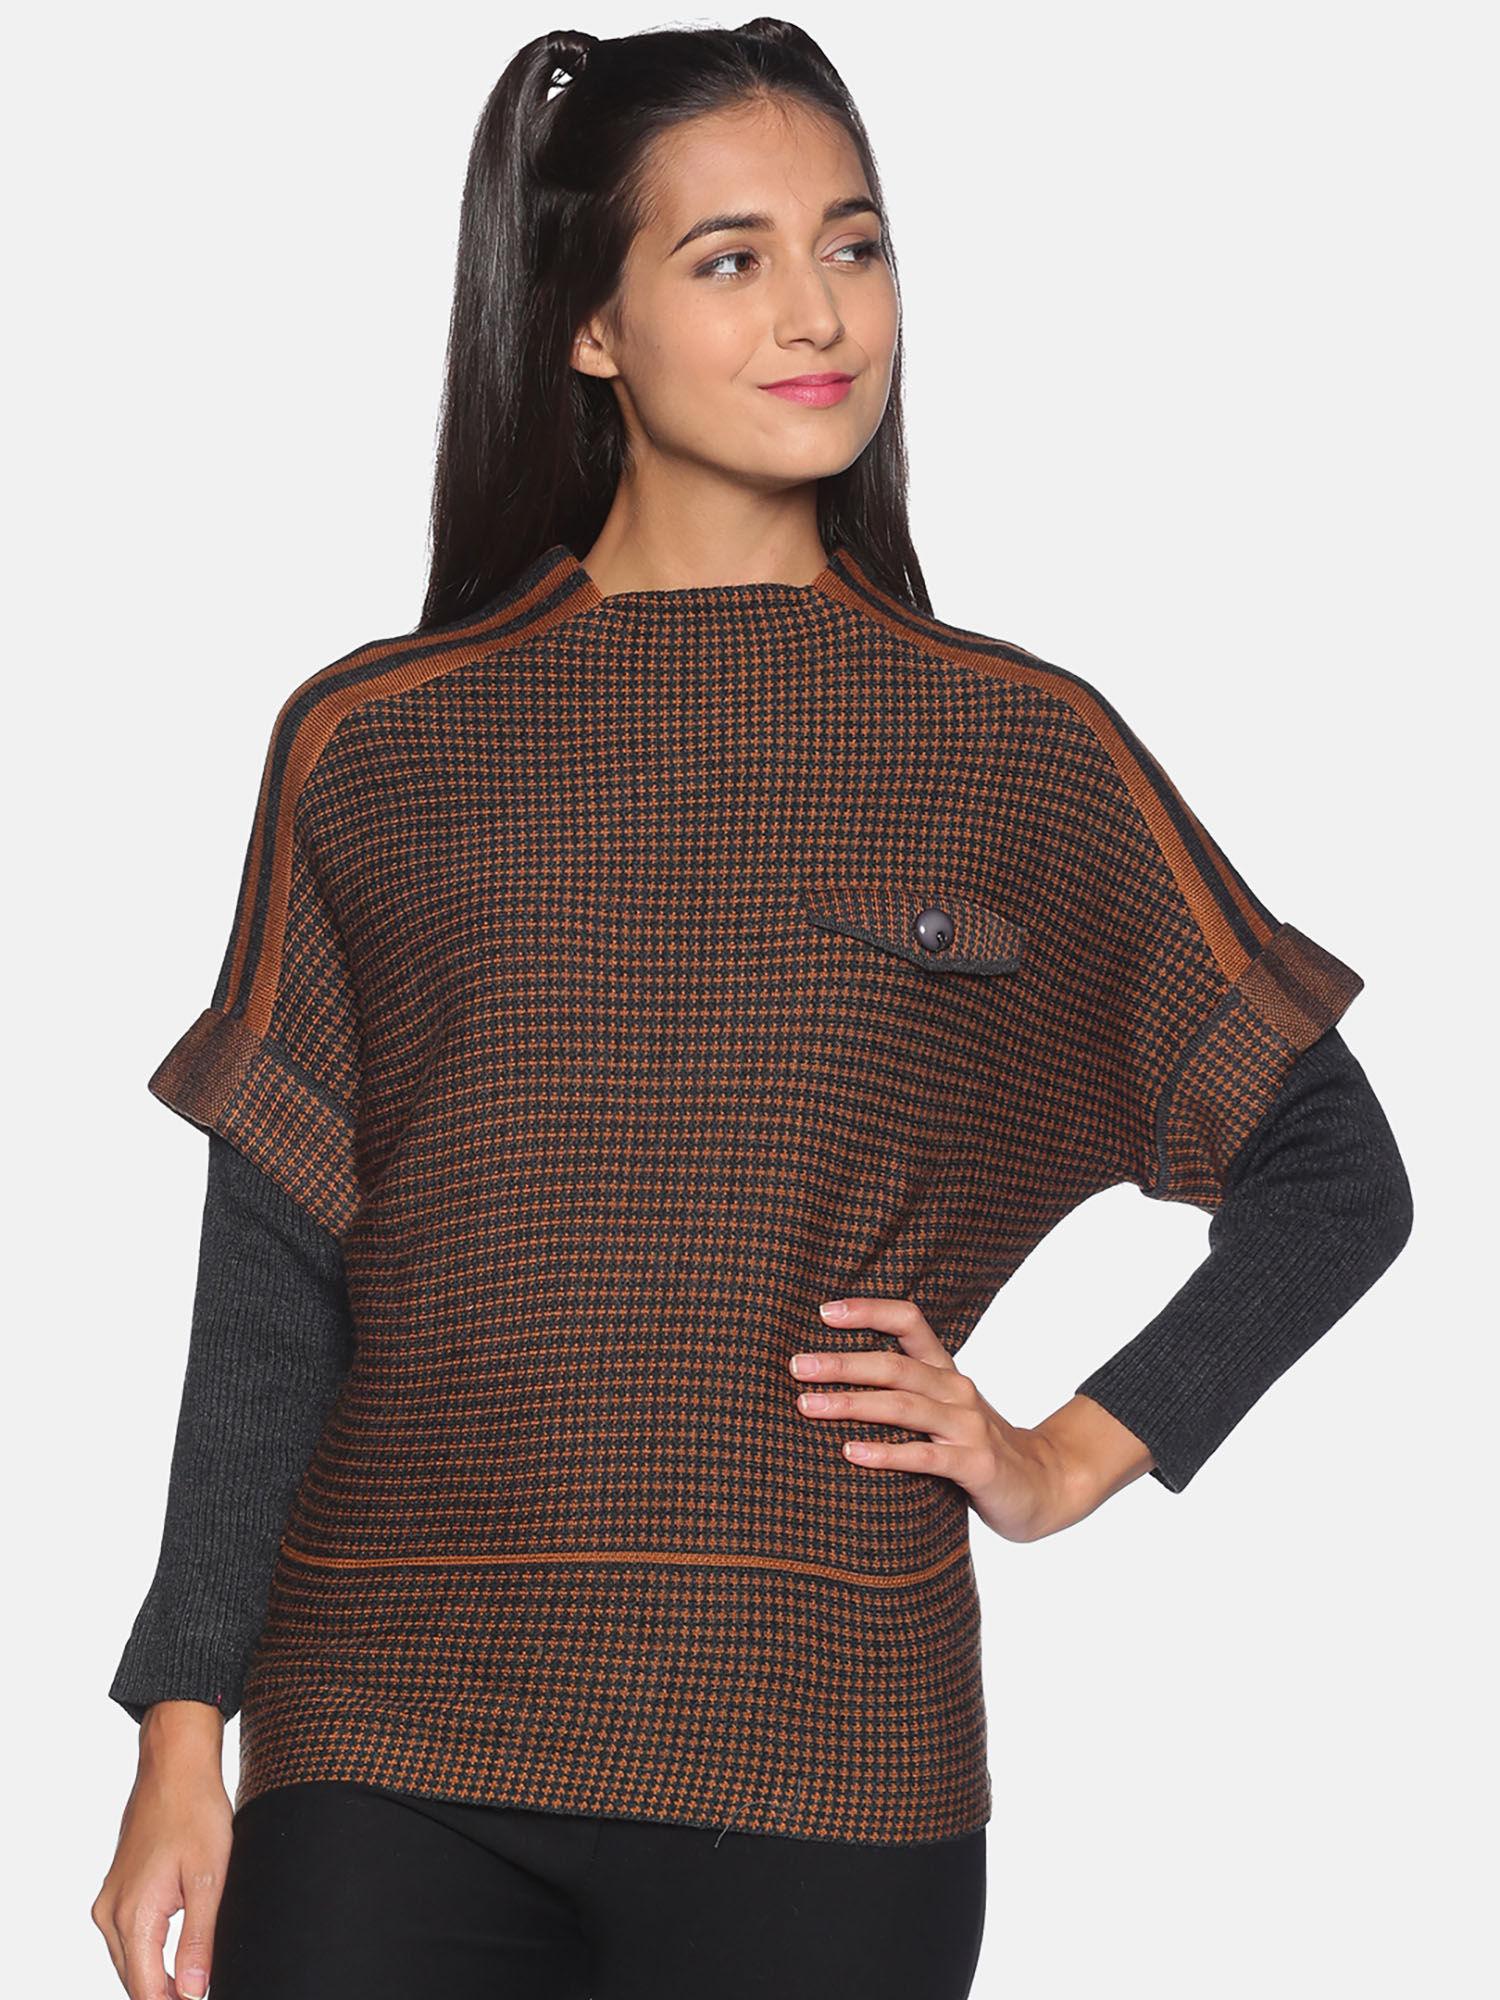 women brown color sweater